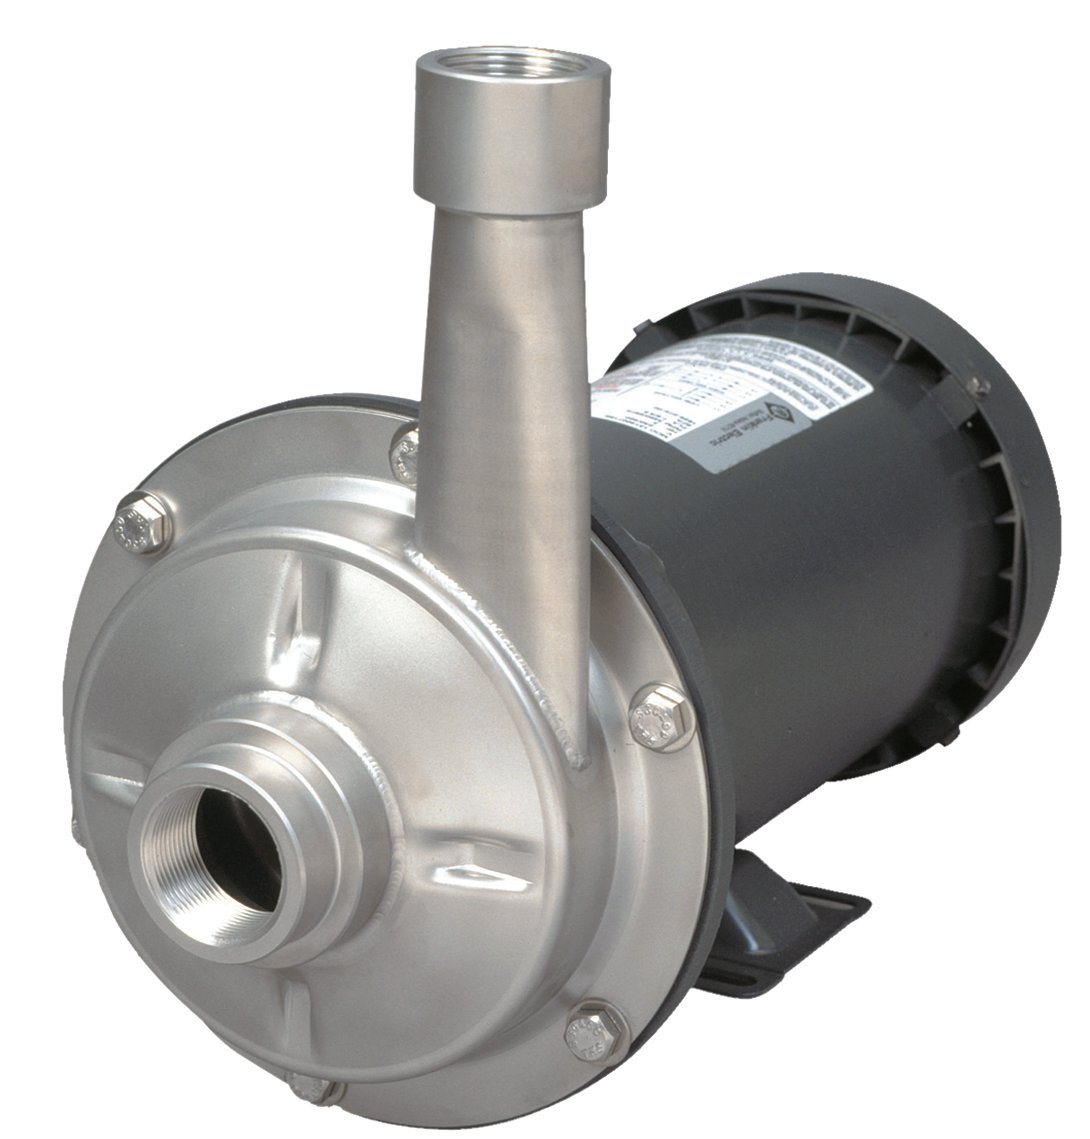 AMT Stainless Steel Straight Centrifugal Pumps